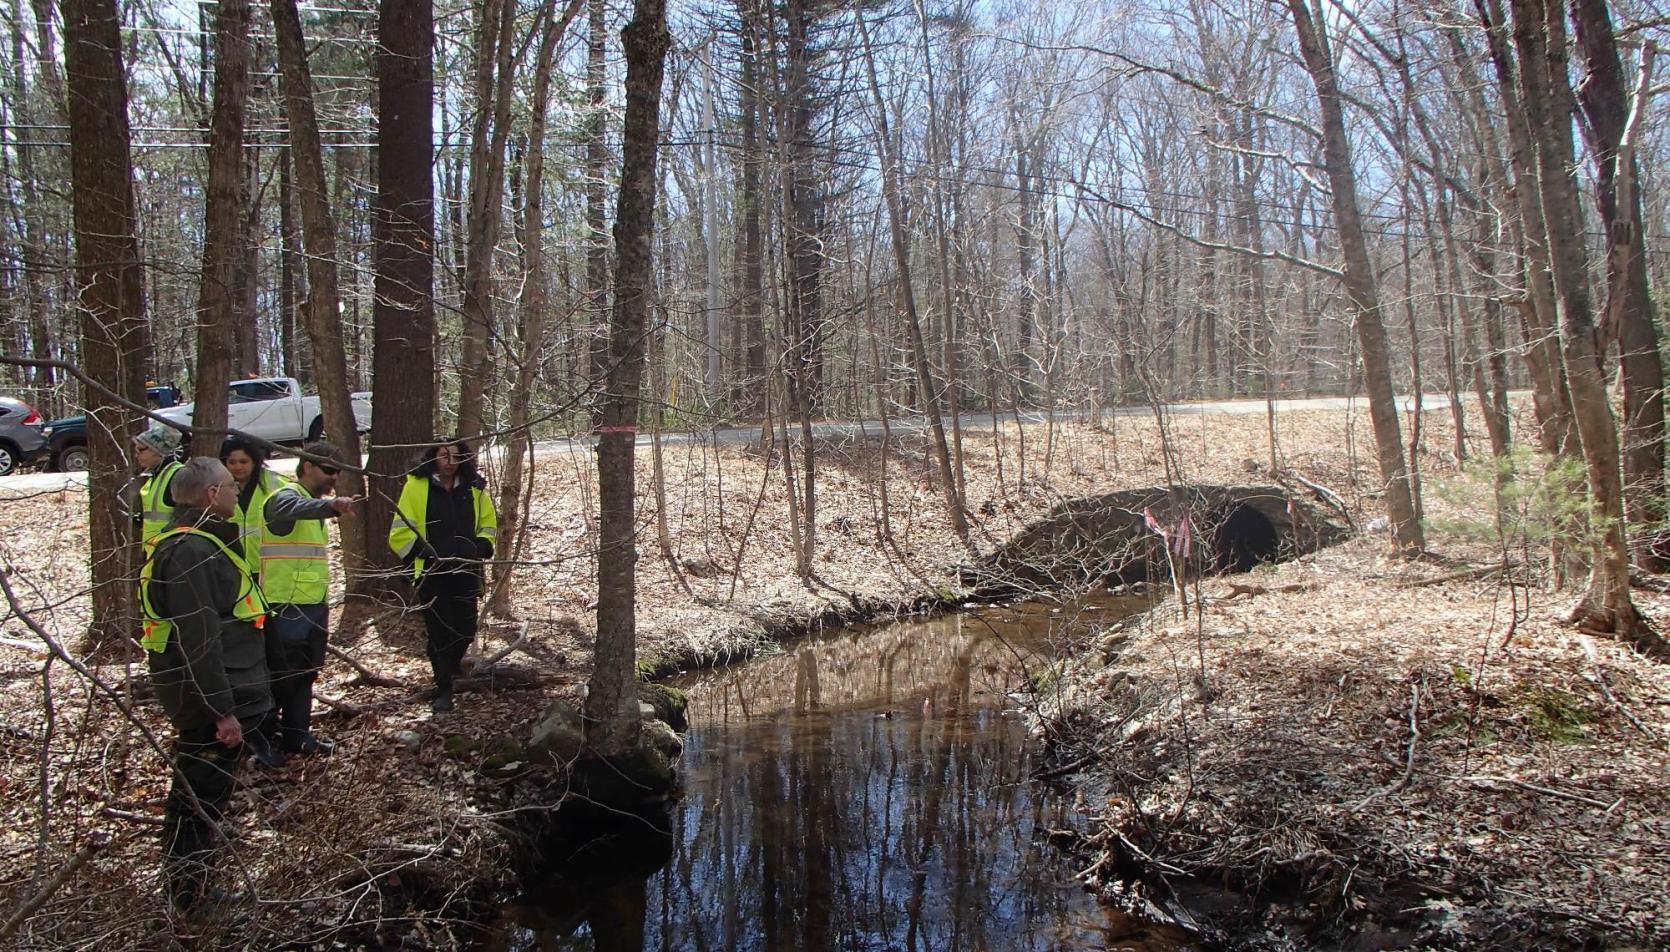 DER leads a training at site of undersized culvert